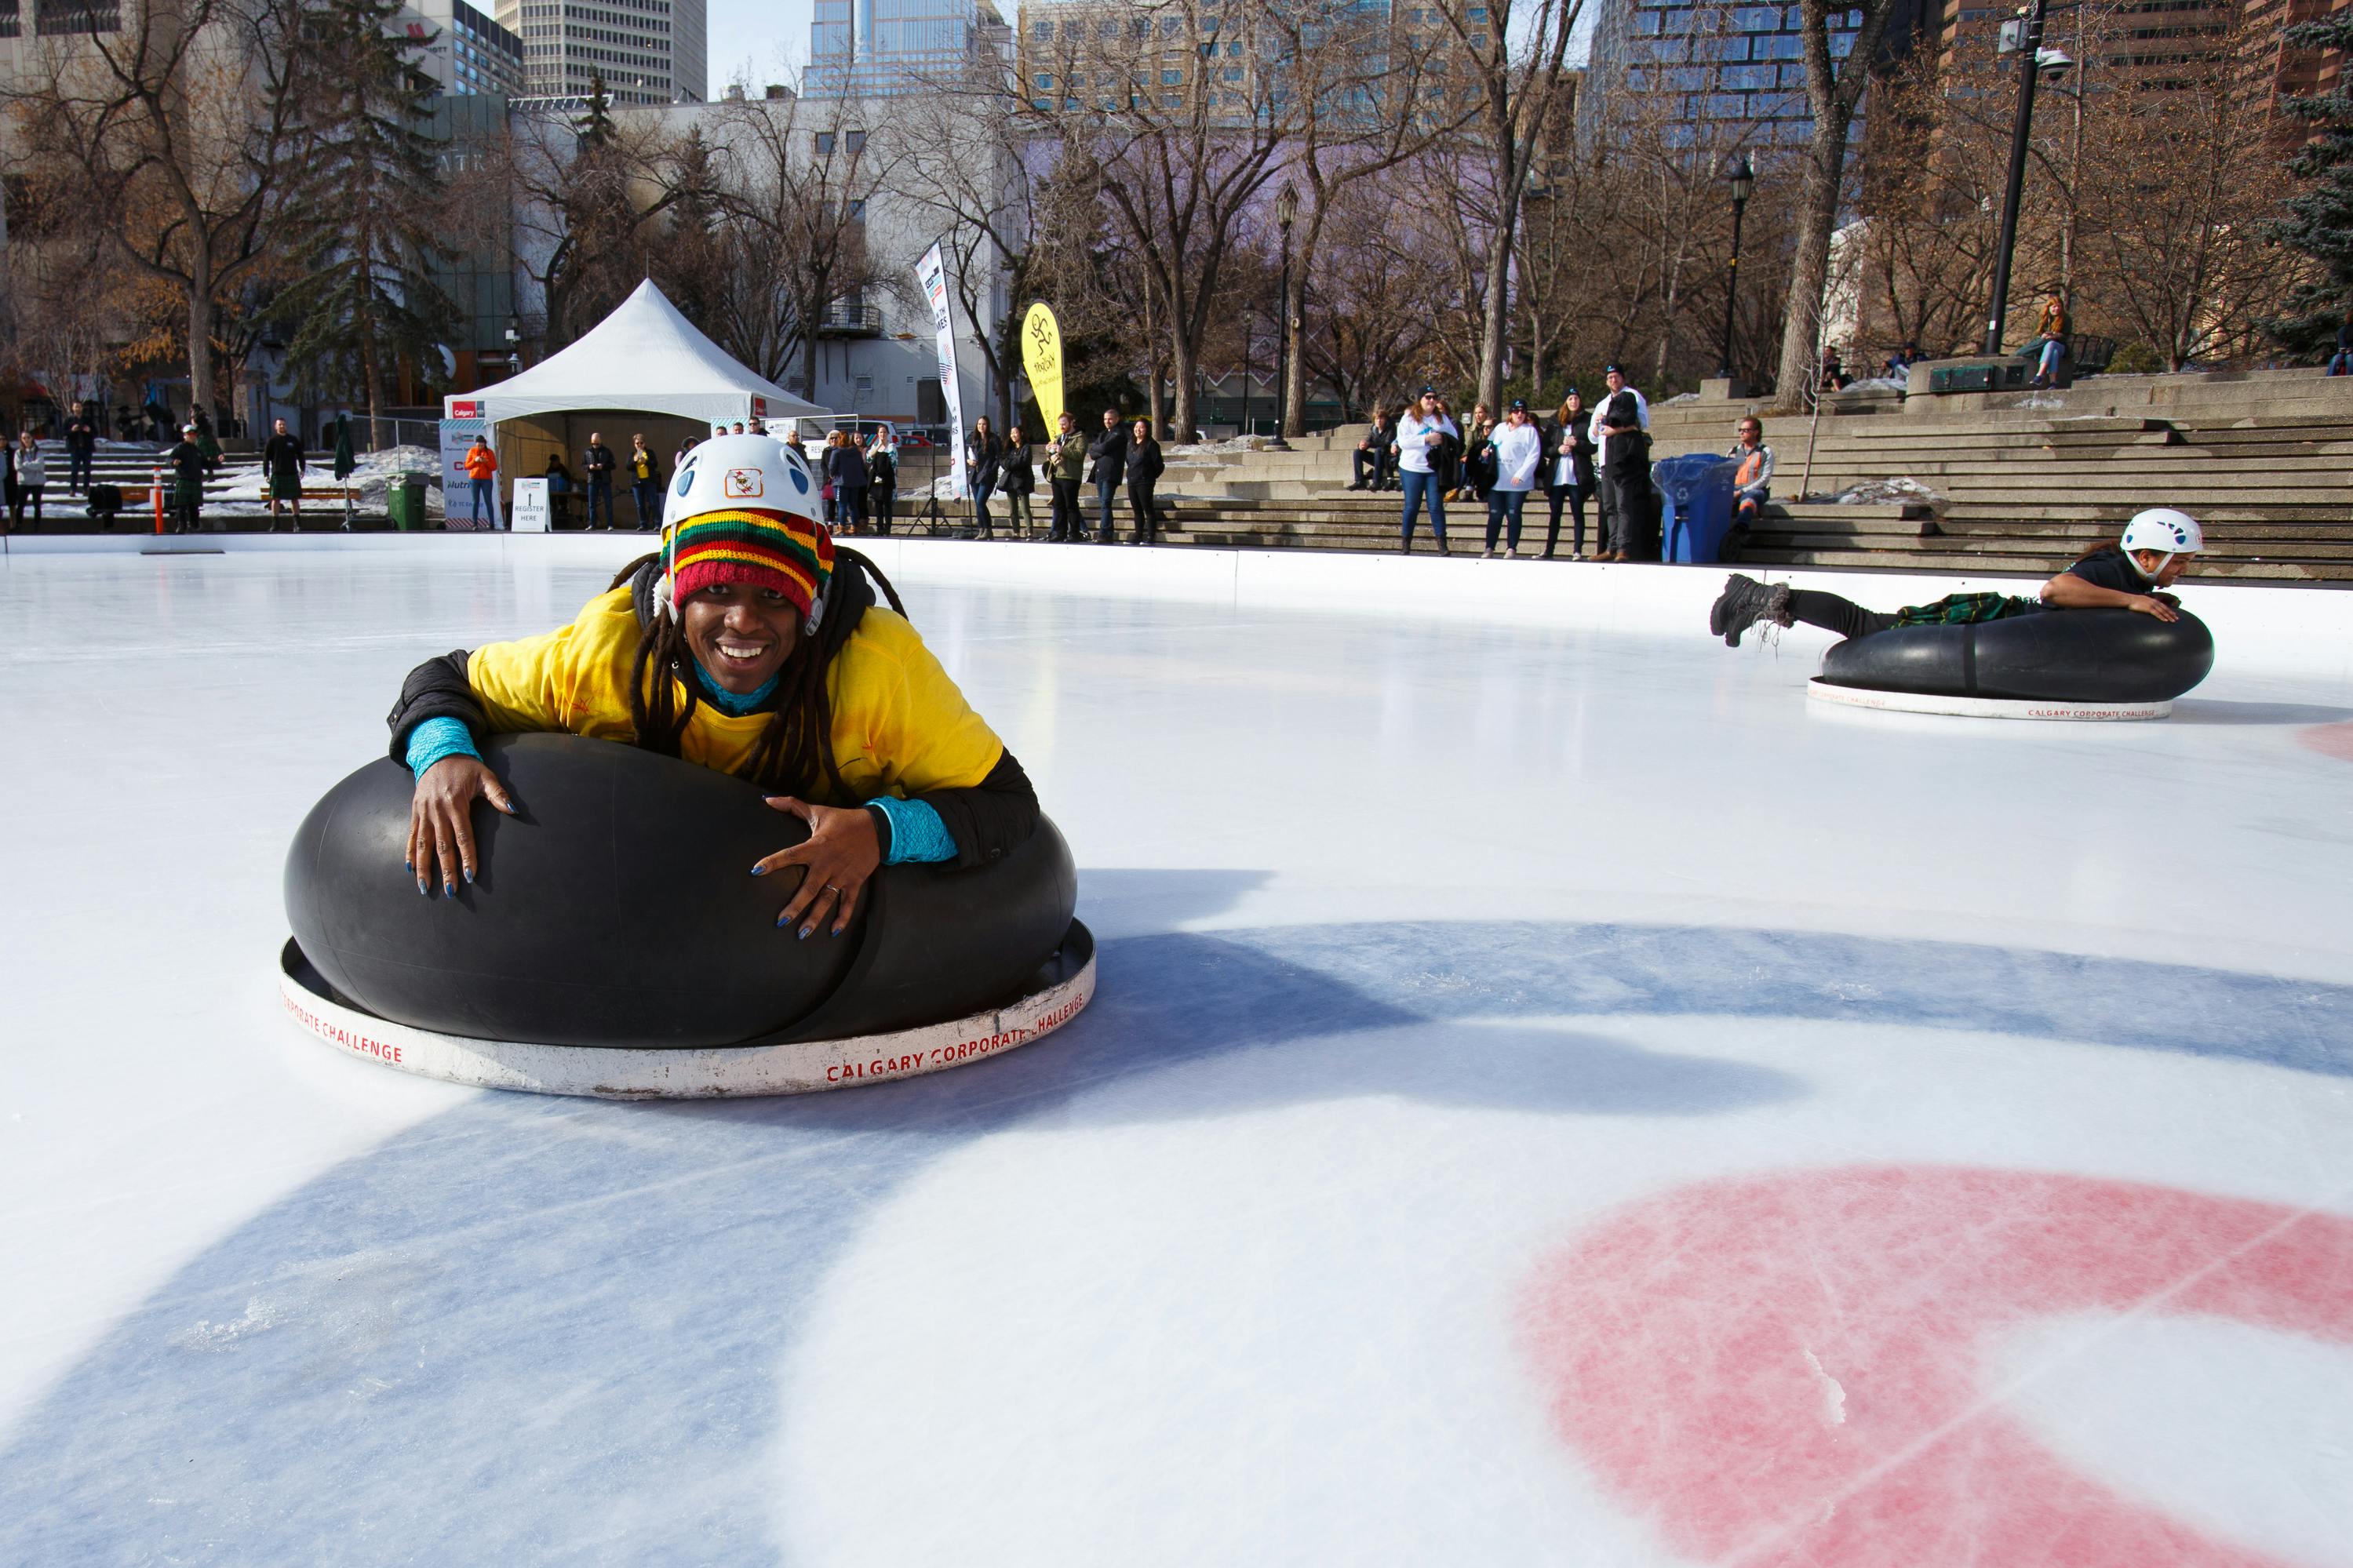 a man smiling on the inner tube next to the curling rings